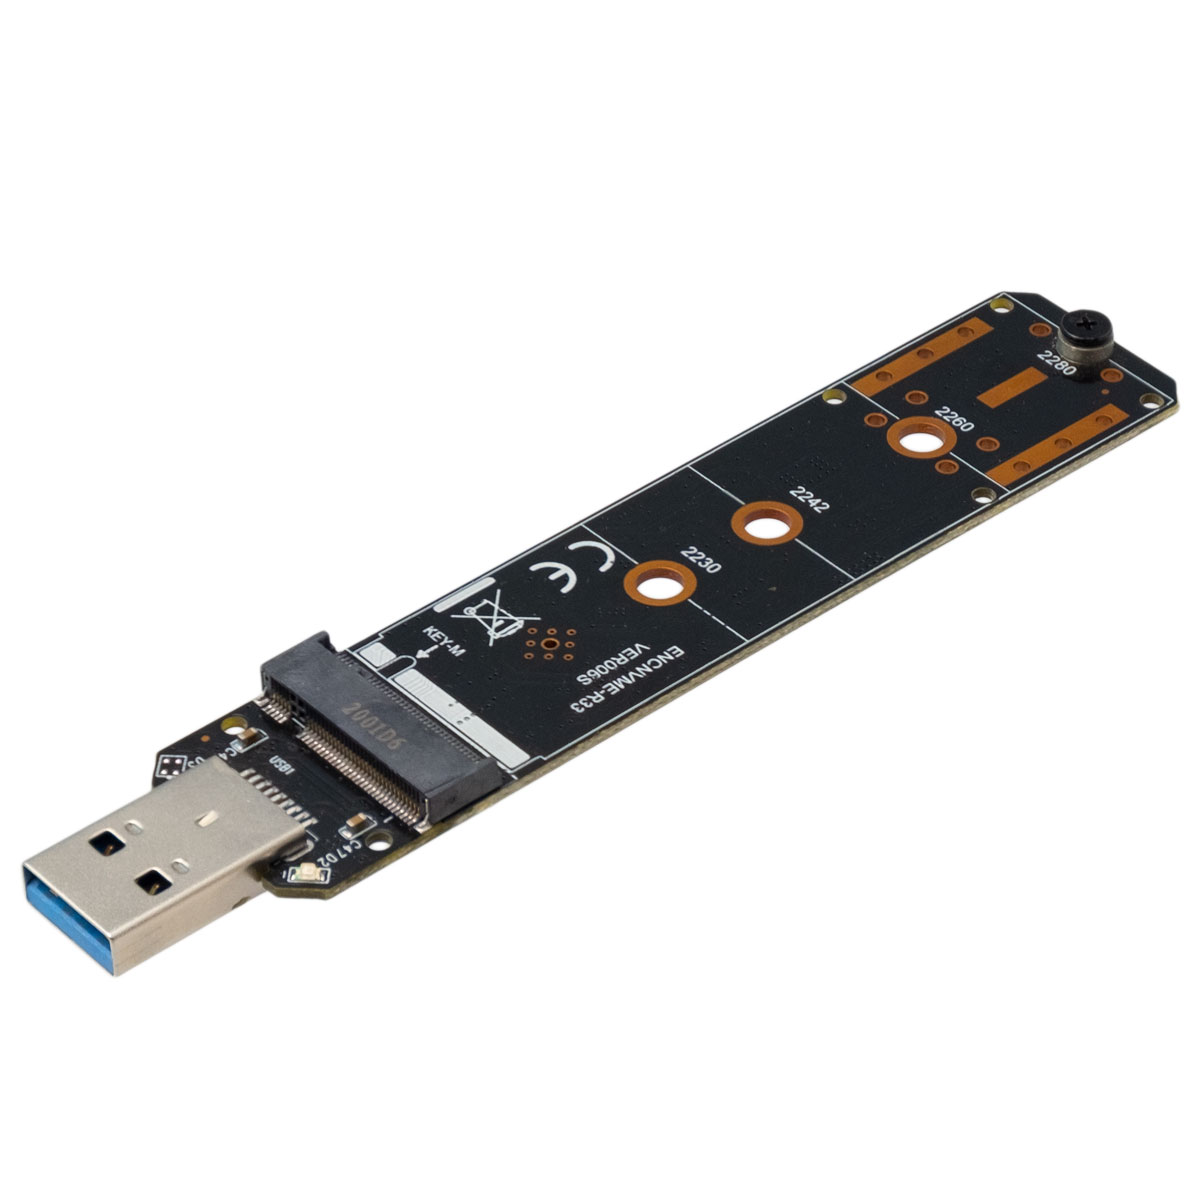 USB 3.0 to NVMe type M adapter